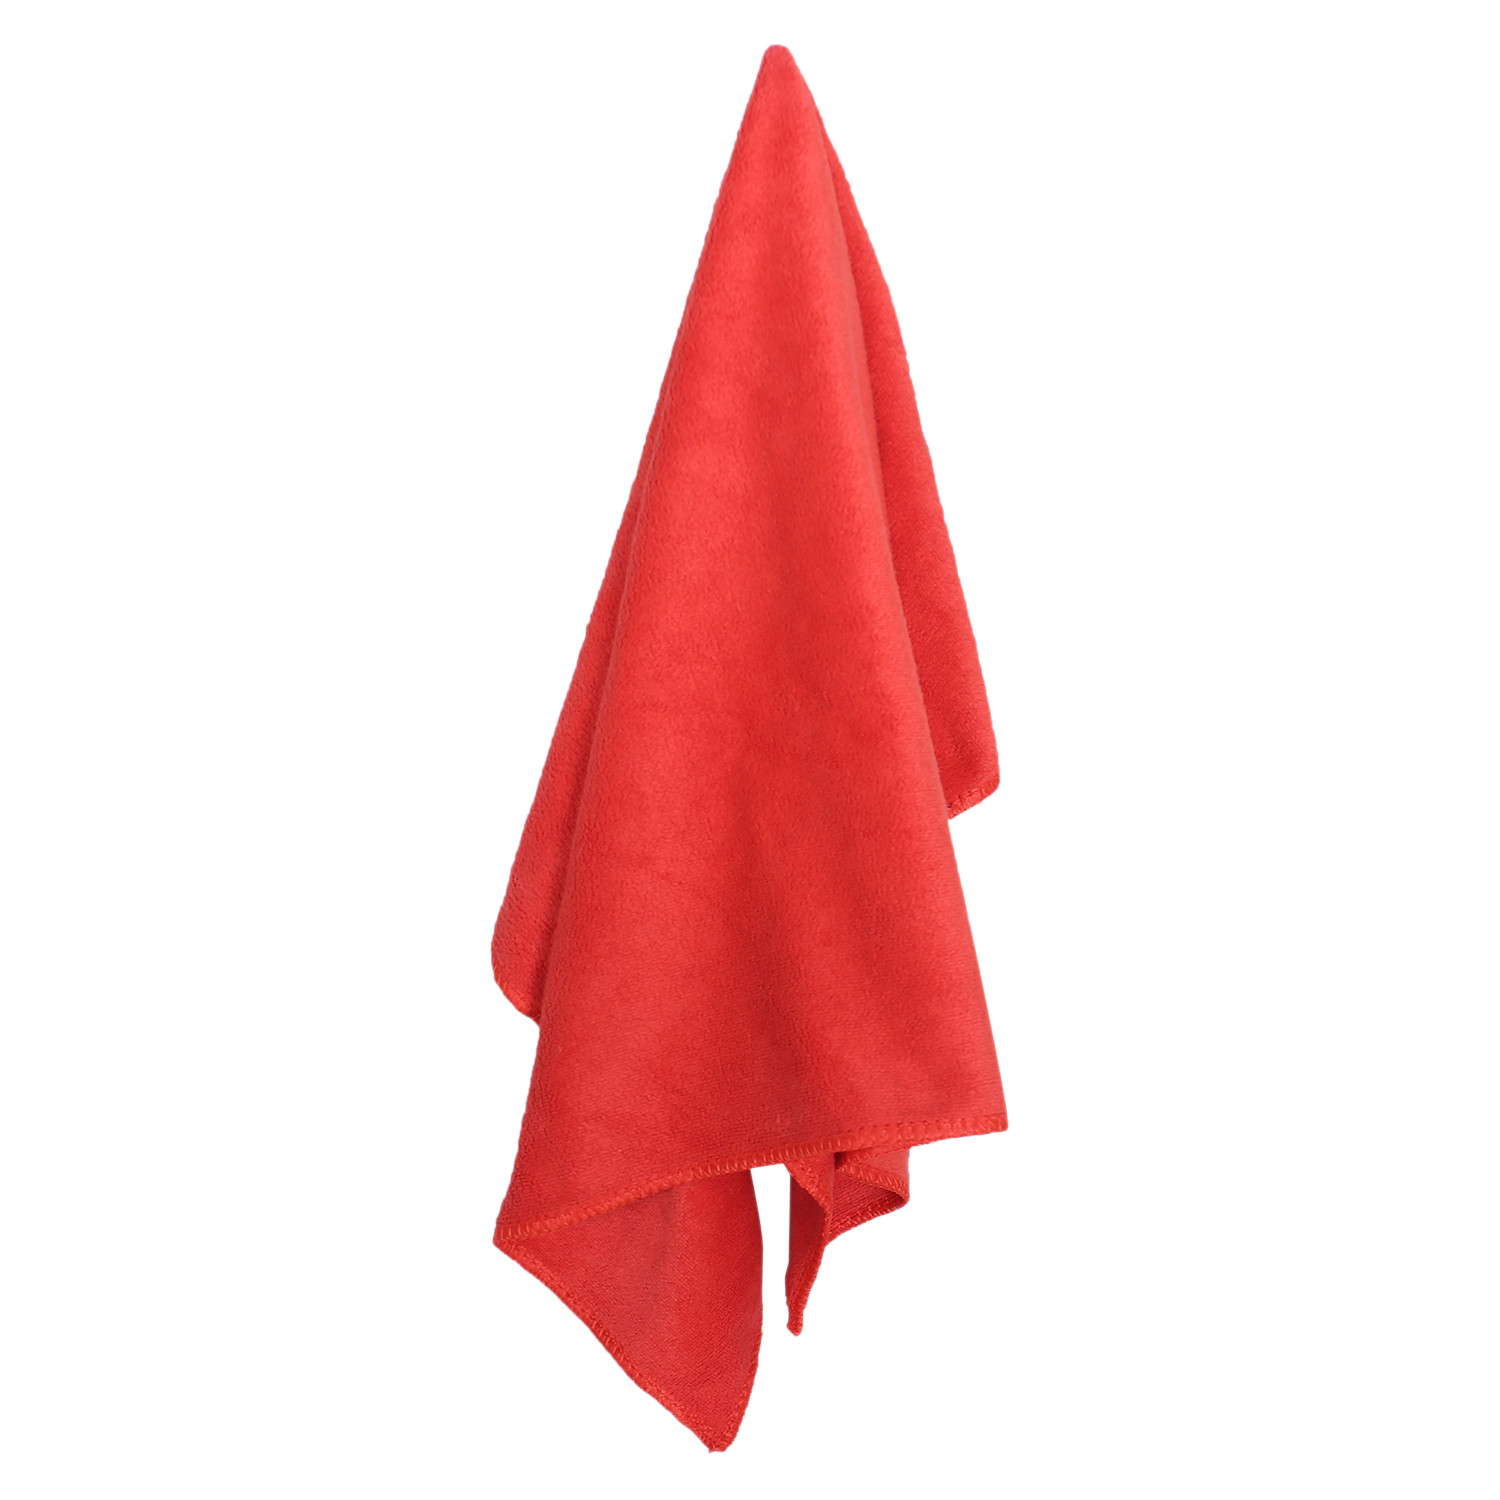 Kuber Industries Cleaning Cloths|Microfiber Highly Absorbent Wash Towels for Kitchen,Car,Window,24 x 16 Inch (Red)